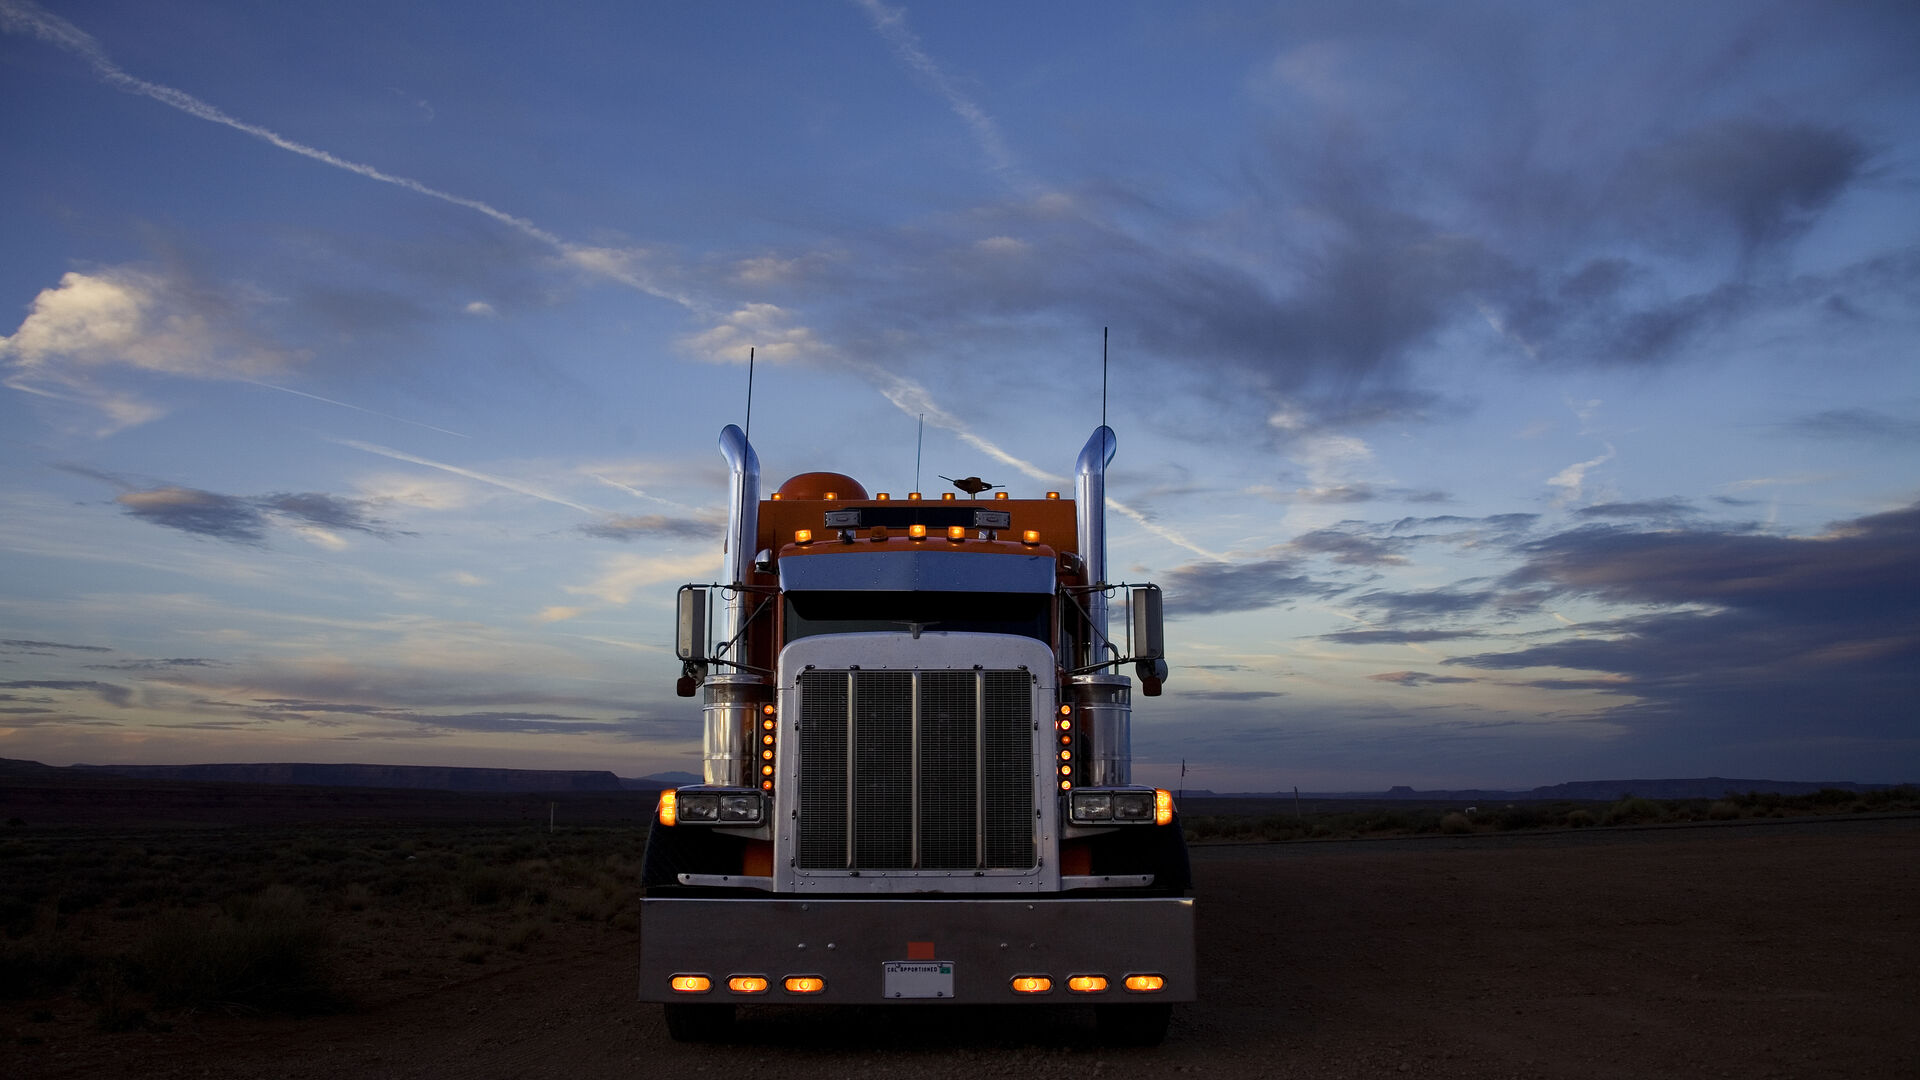 The Senate voted 50-49 to overturn an EPA rule that would create significantly stricter emissions standards for heavy-duty trucks.